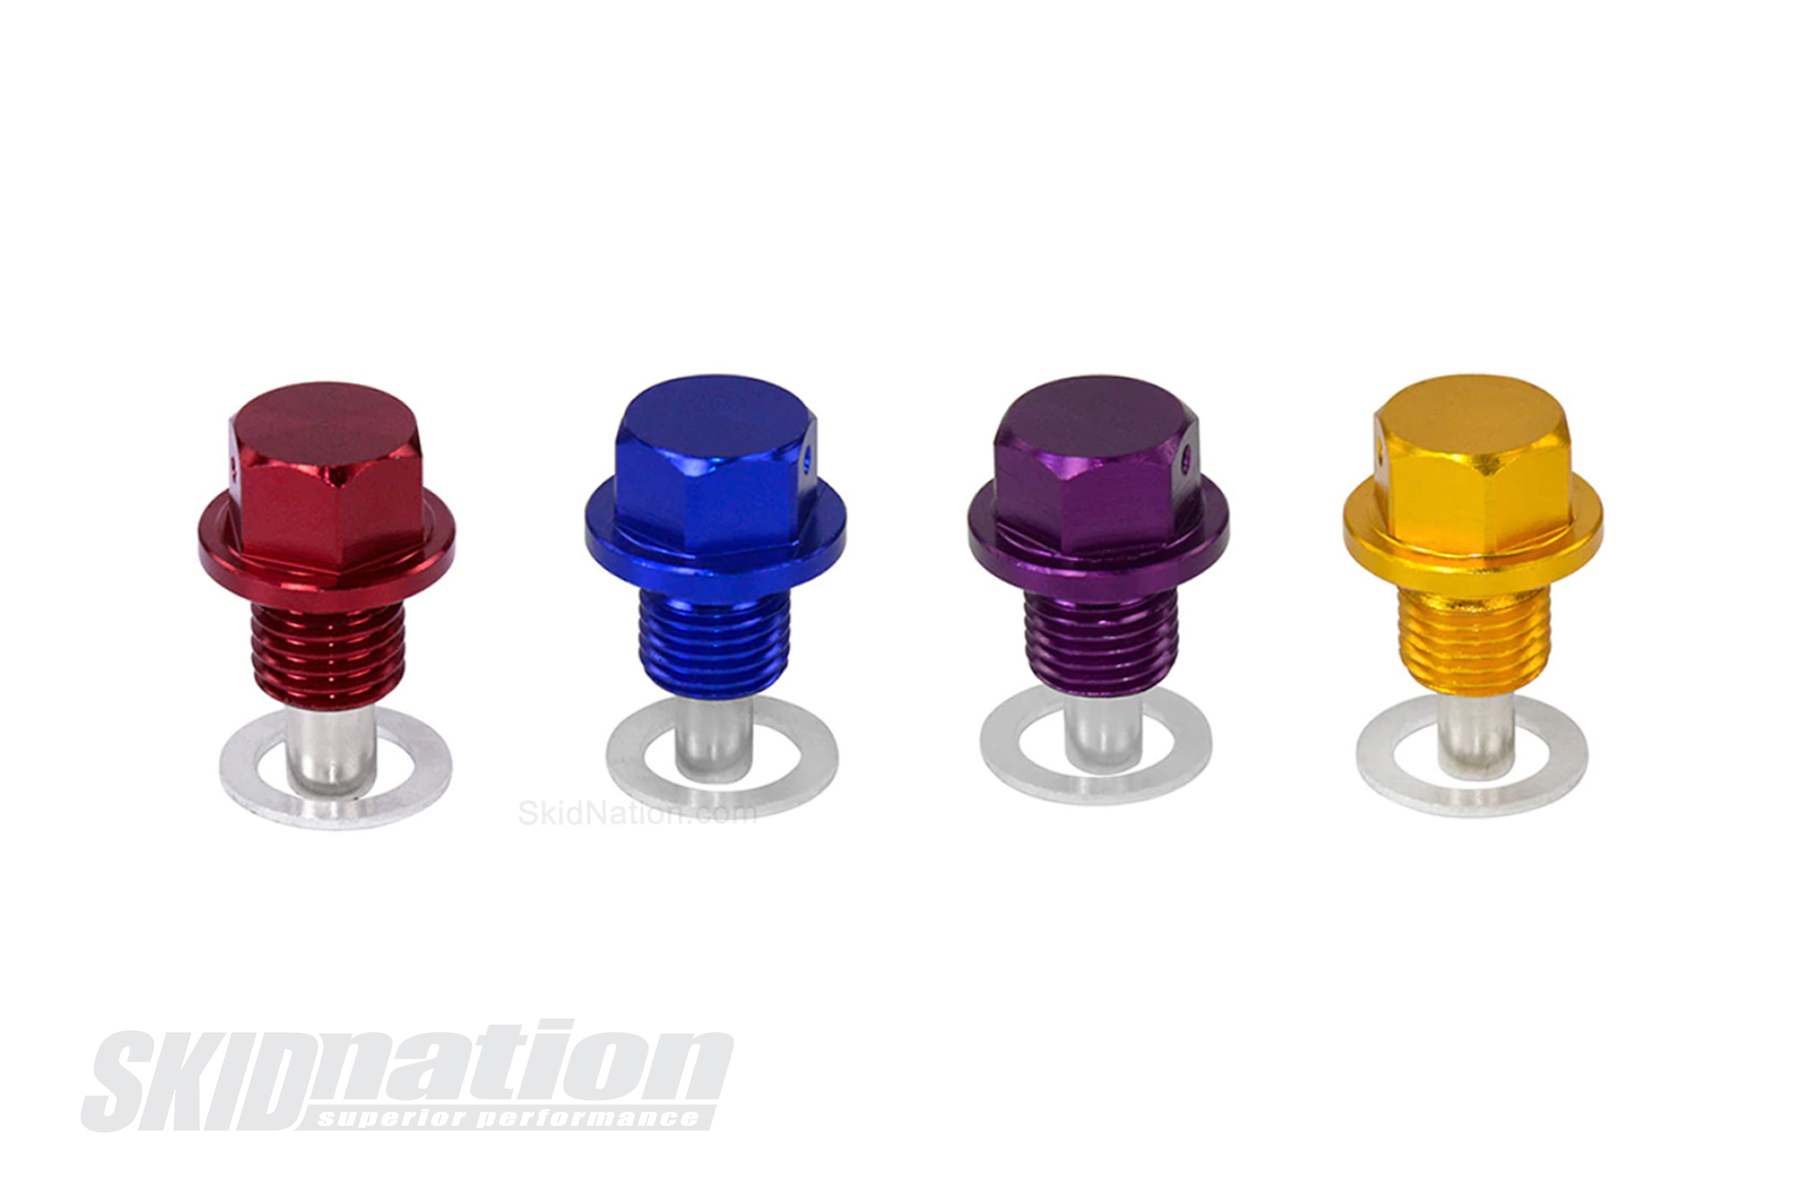 https://skidnation.com/wp-content/uploads/mx-5-magnetic-oil-sump-plug-all-colours.jpg